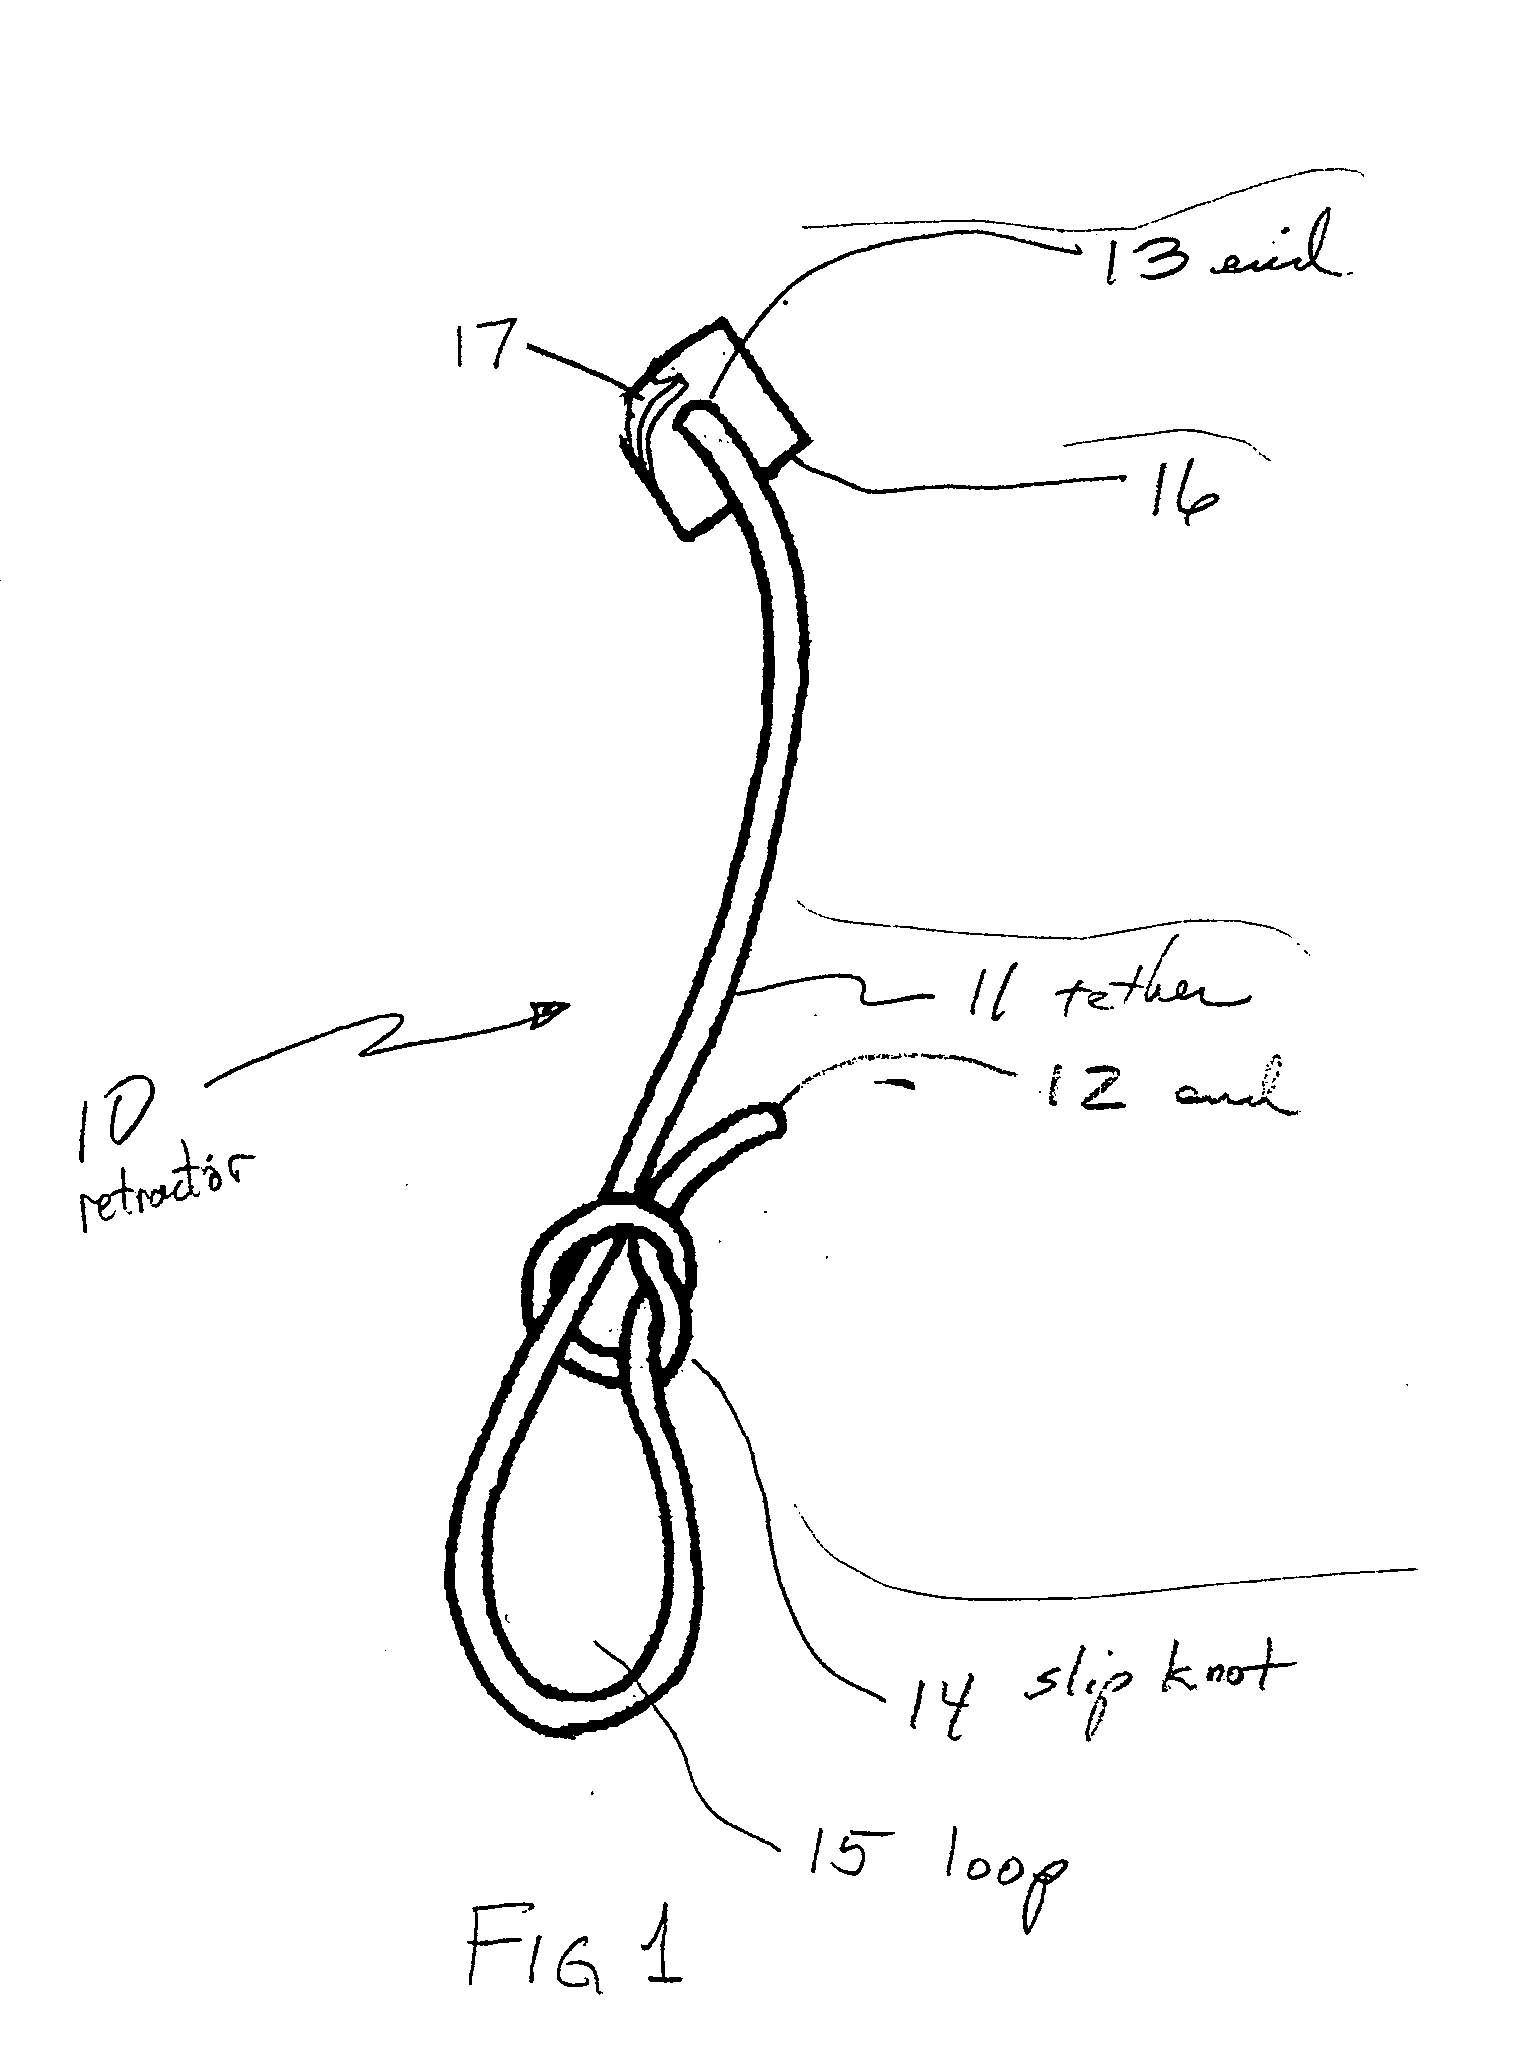 Penis retractor for use in surgical or other medical procedures